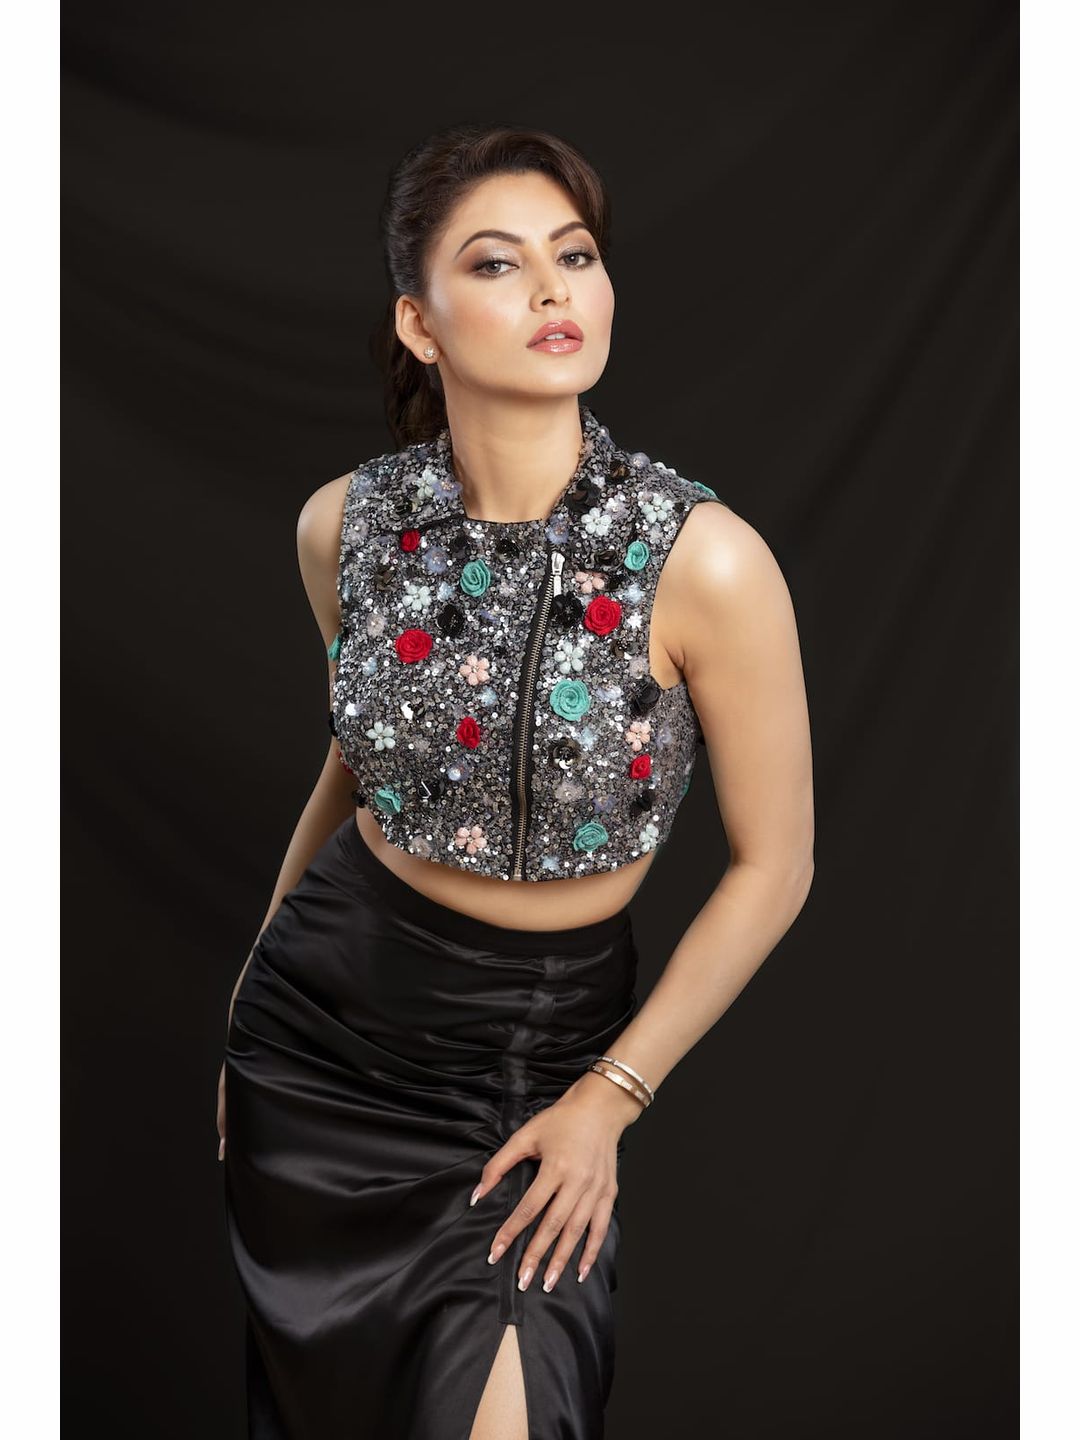 The Callie Western Dresses for Women - Reema Anand Label